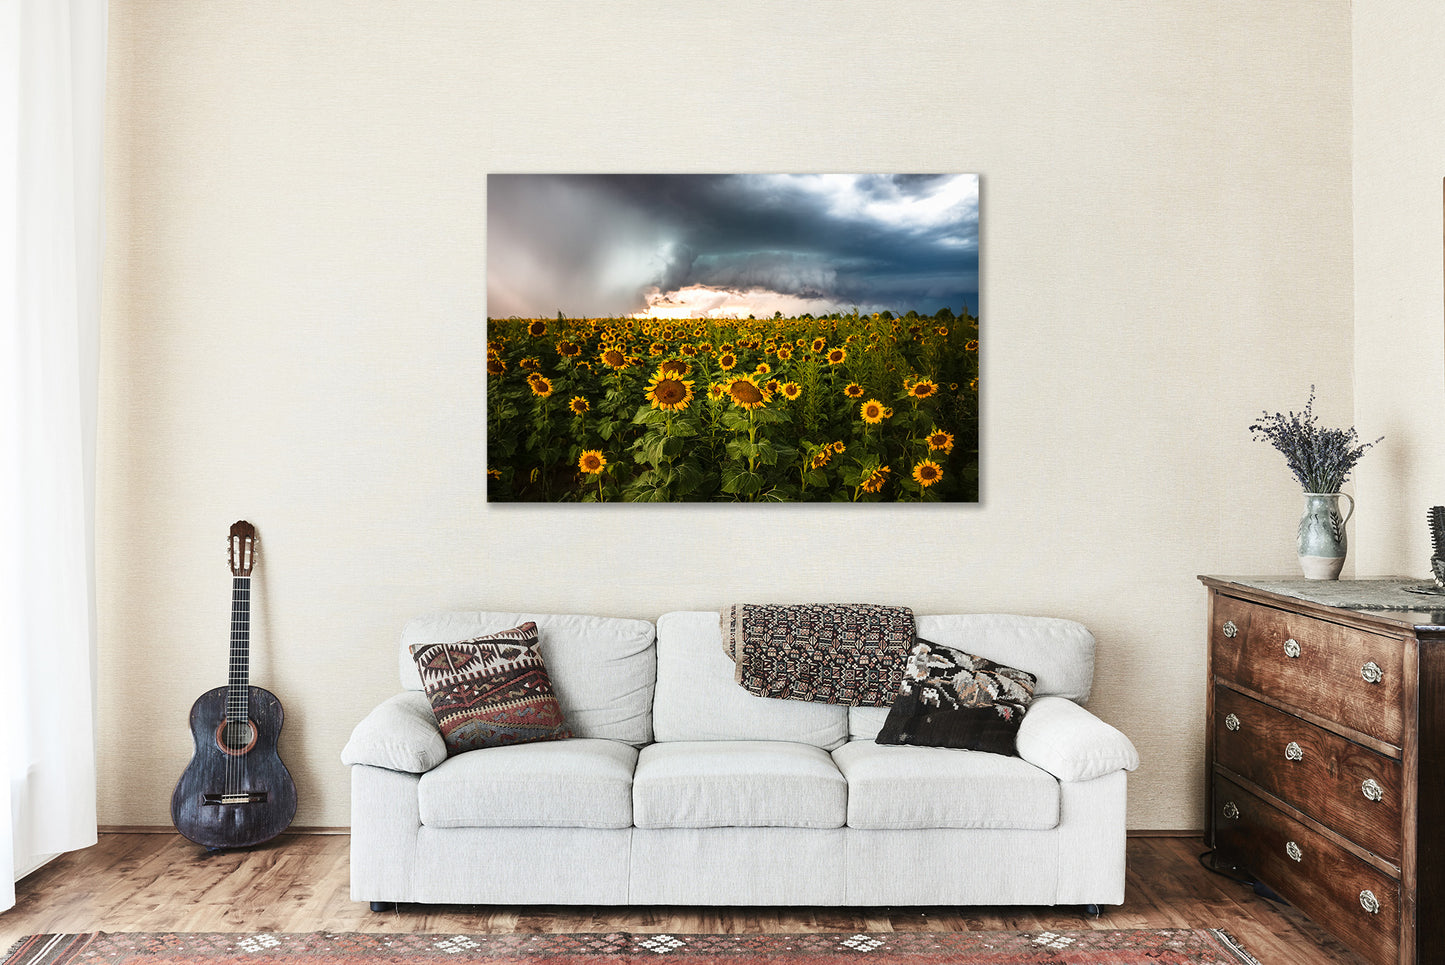 Country Metal Print (Ready to Hang) Gallery Wrap of Sunflowers Facing Away from Storm in Kansas Farm Wall Art Farmhouse Decor